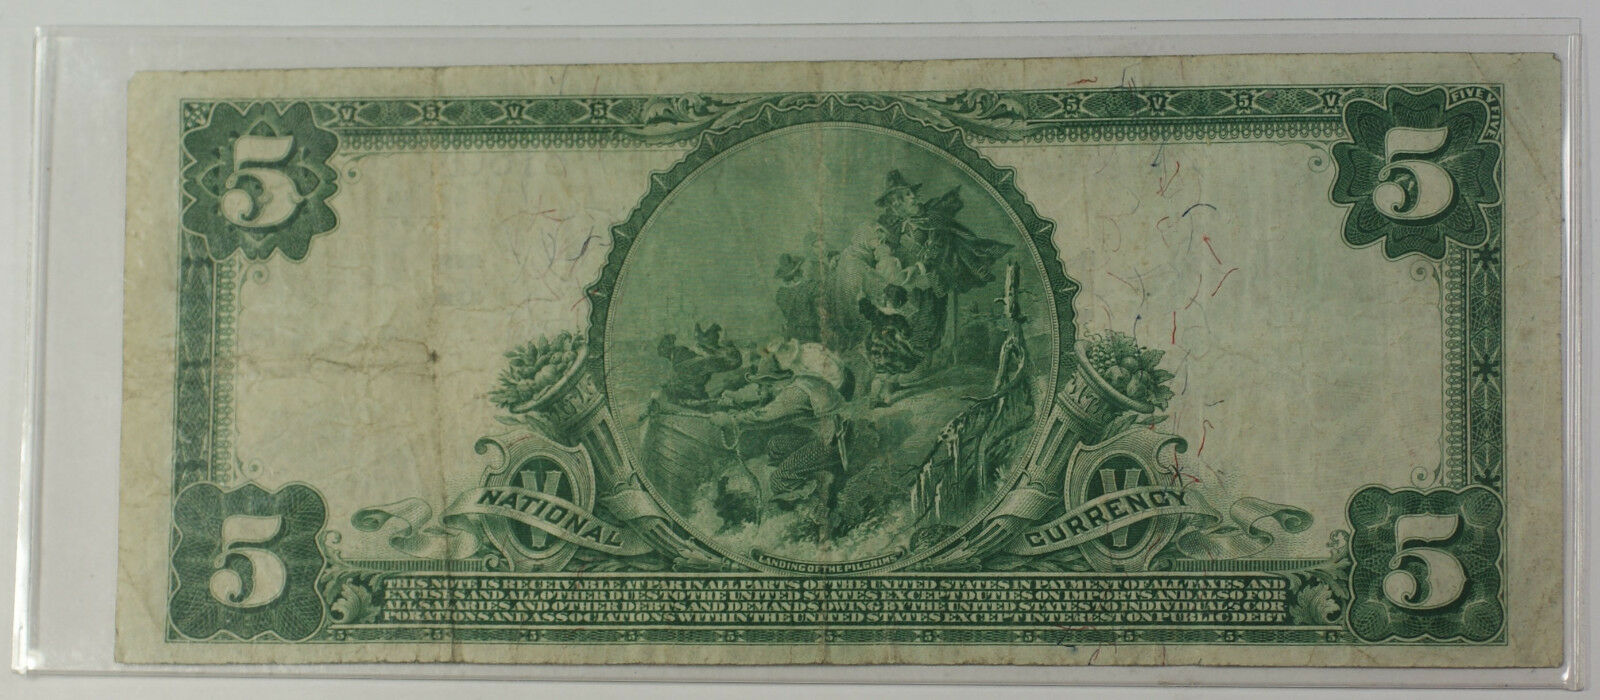 1902 Plain Back $5 National Currency Banknote Cohoes New York Charter # E 1347